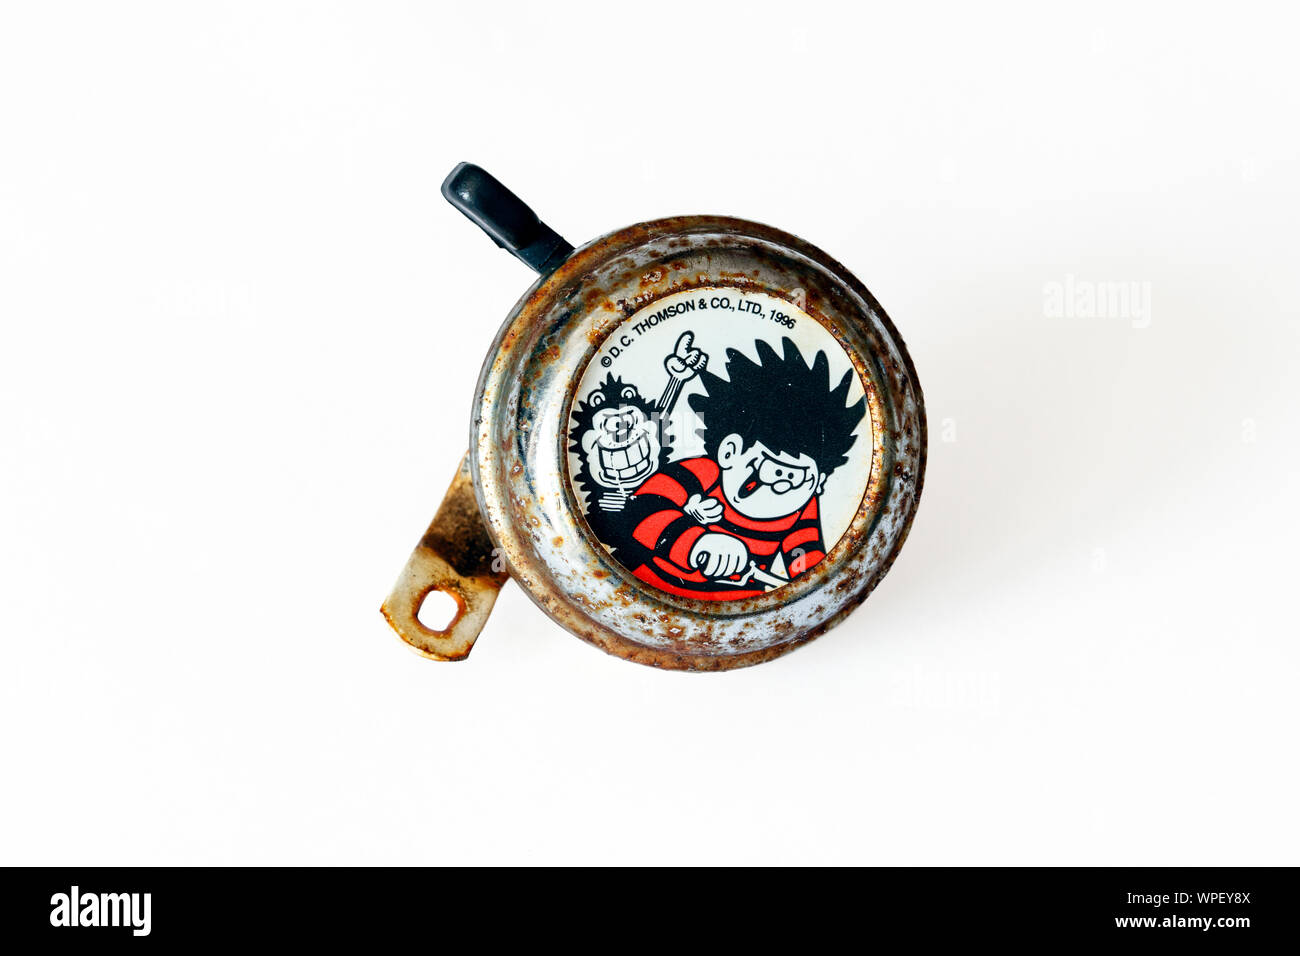 An old and rusty 'Dennis the Menace and Gnasher' (characters from the Beano children's comic) bicycle bell, isolated on a white background Stock Photo